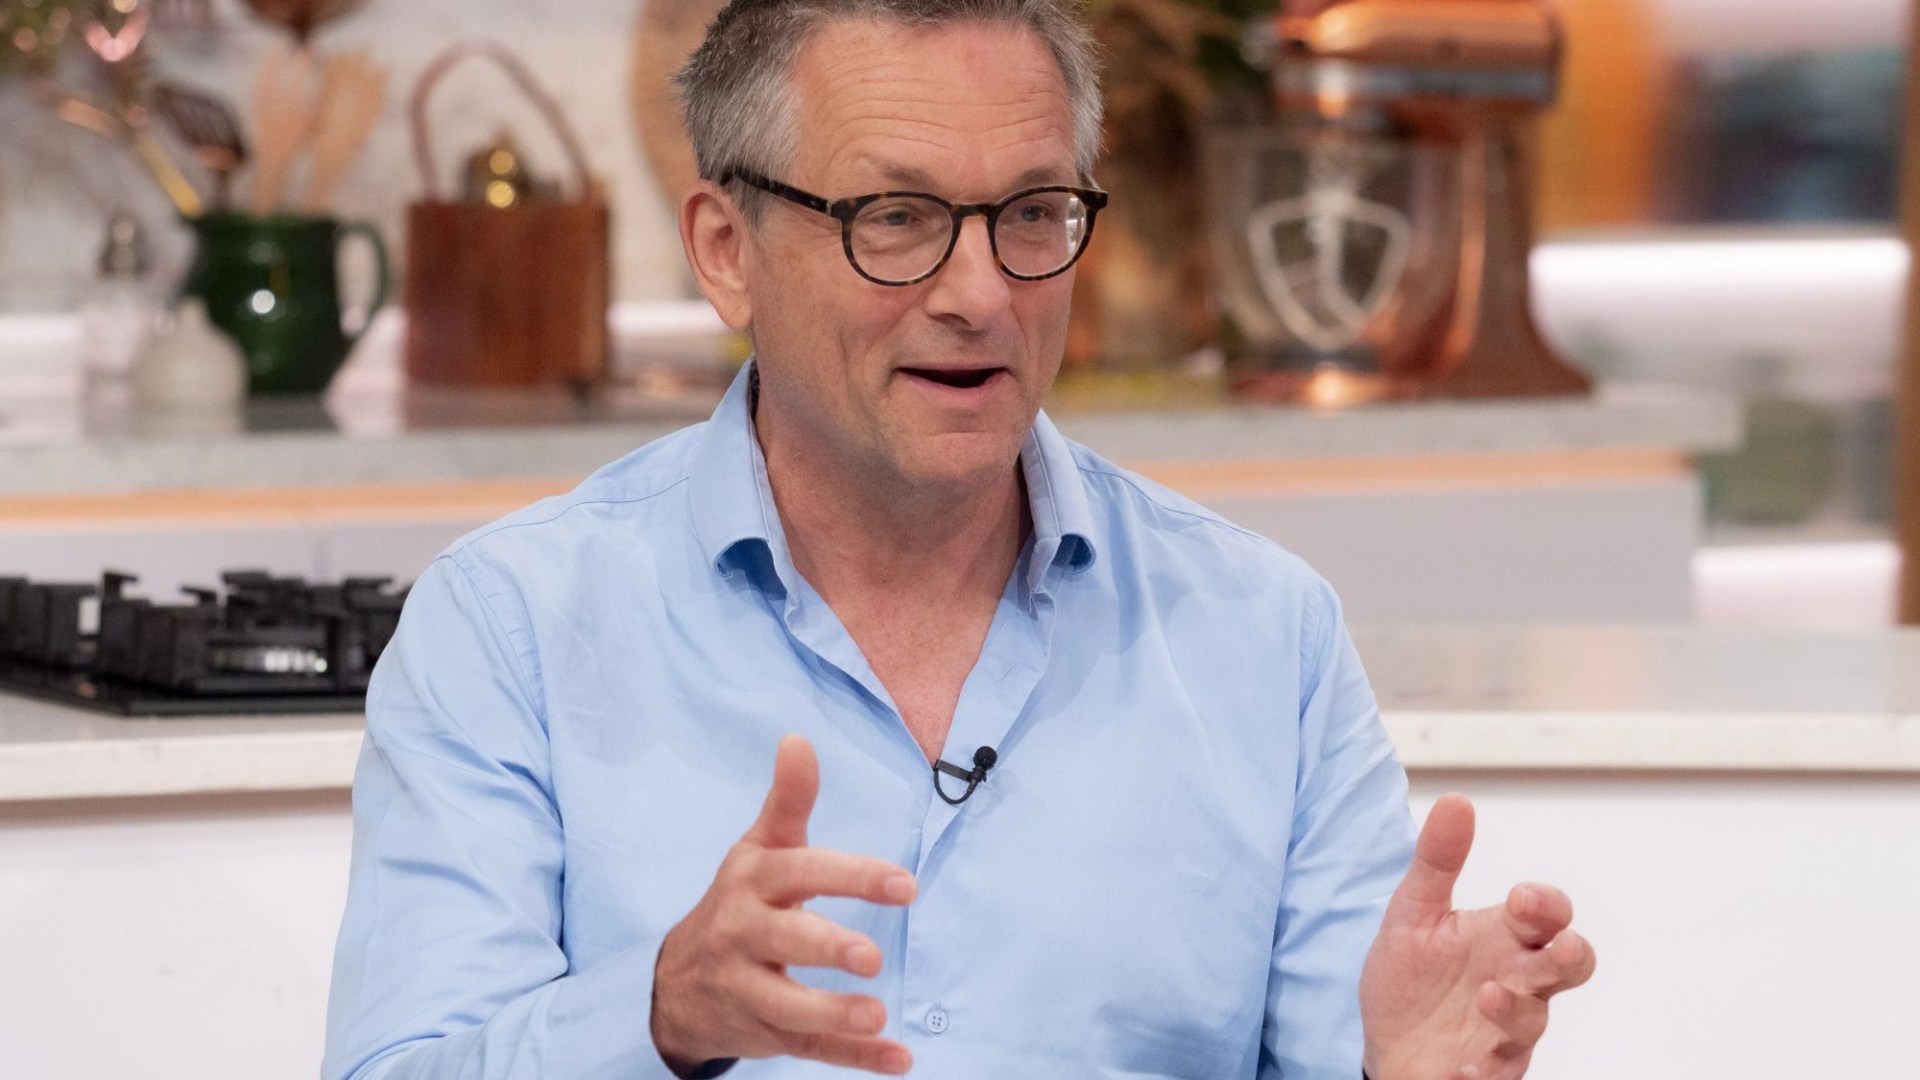 Tragic Dr Michael Mosley said he didnt want to die early like his father in heartbreaking final interview [Video]